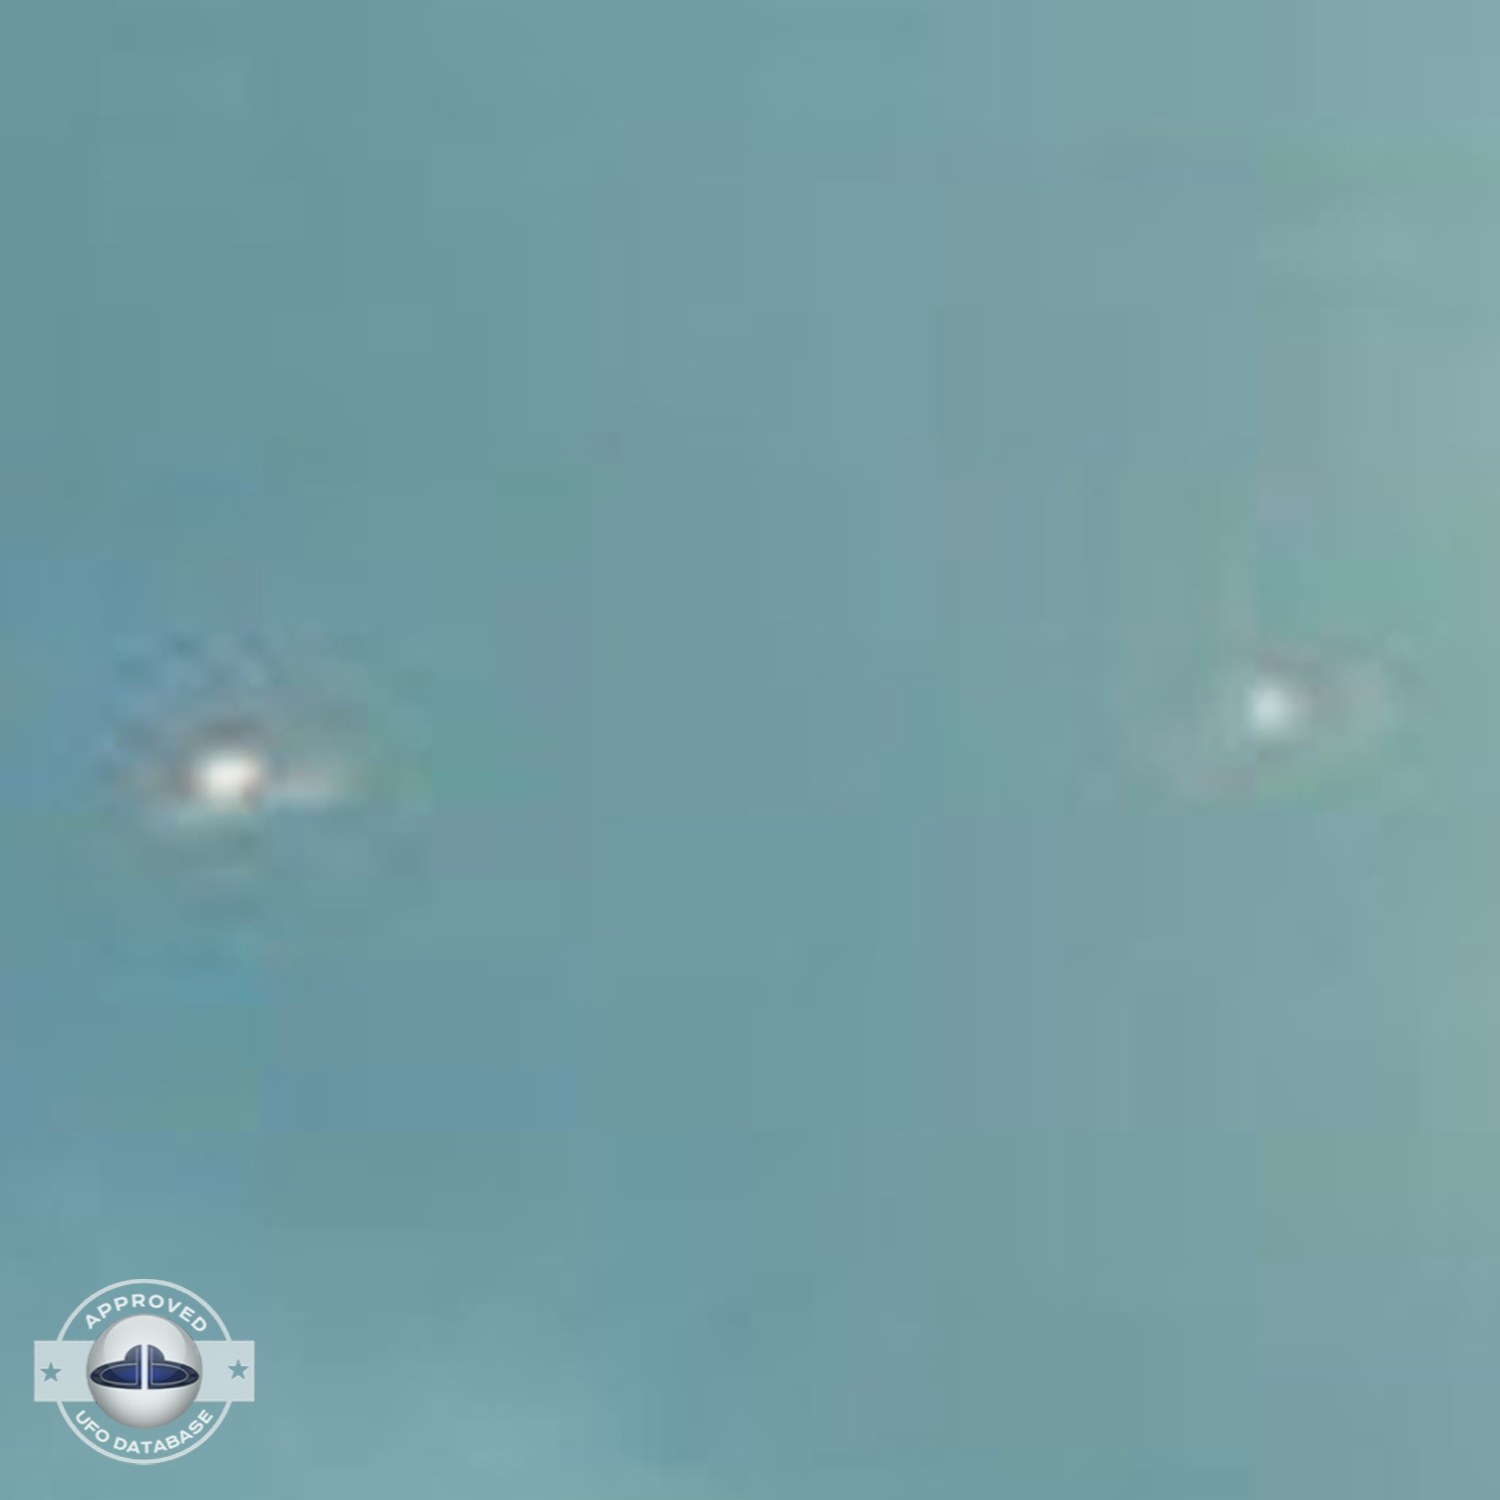 UFO Picture shot on boat on a Princess Cruise to Alaska - June 2006 UFO Picture #95-5